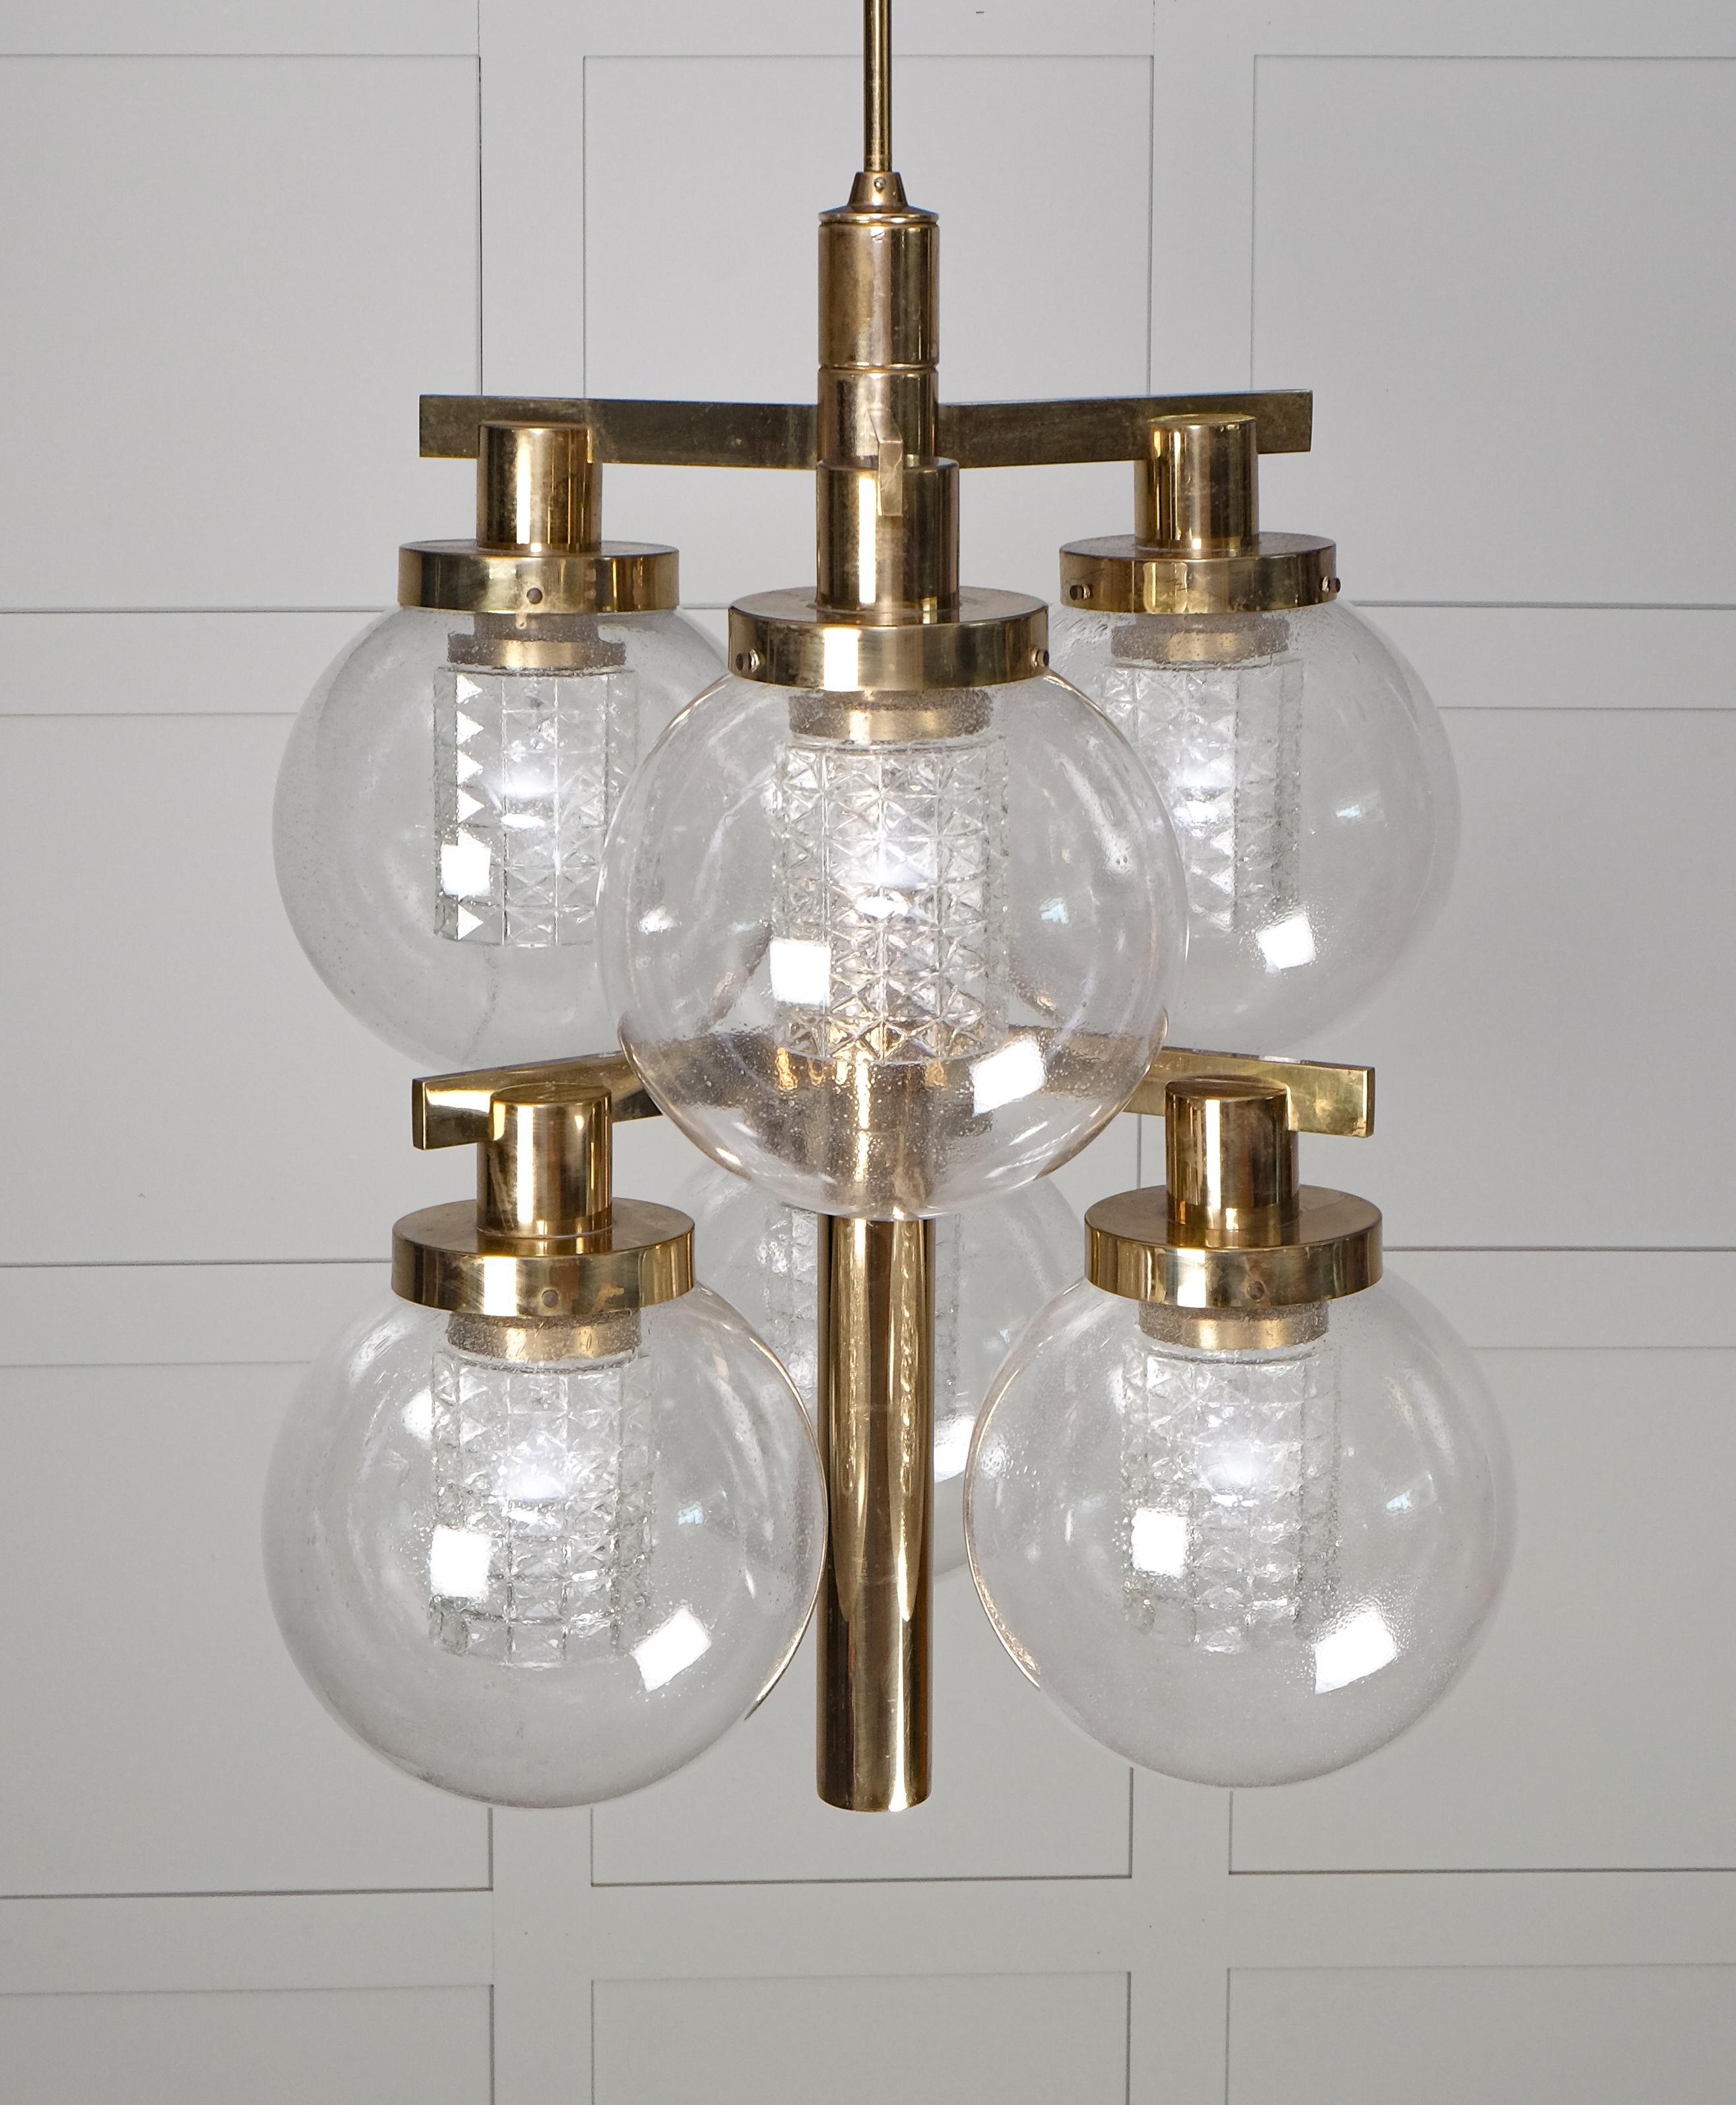 Rare Pair of Hans-Agne Jakobsson Brass Chandeliers, 1960s For Sale 5